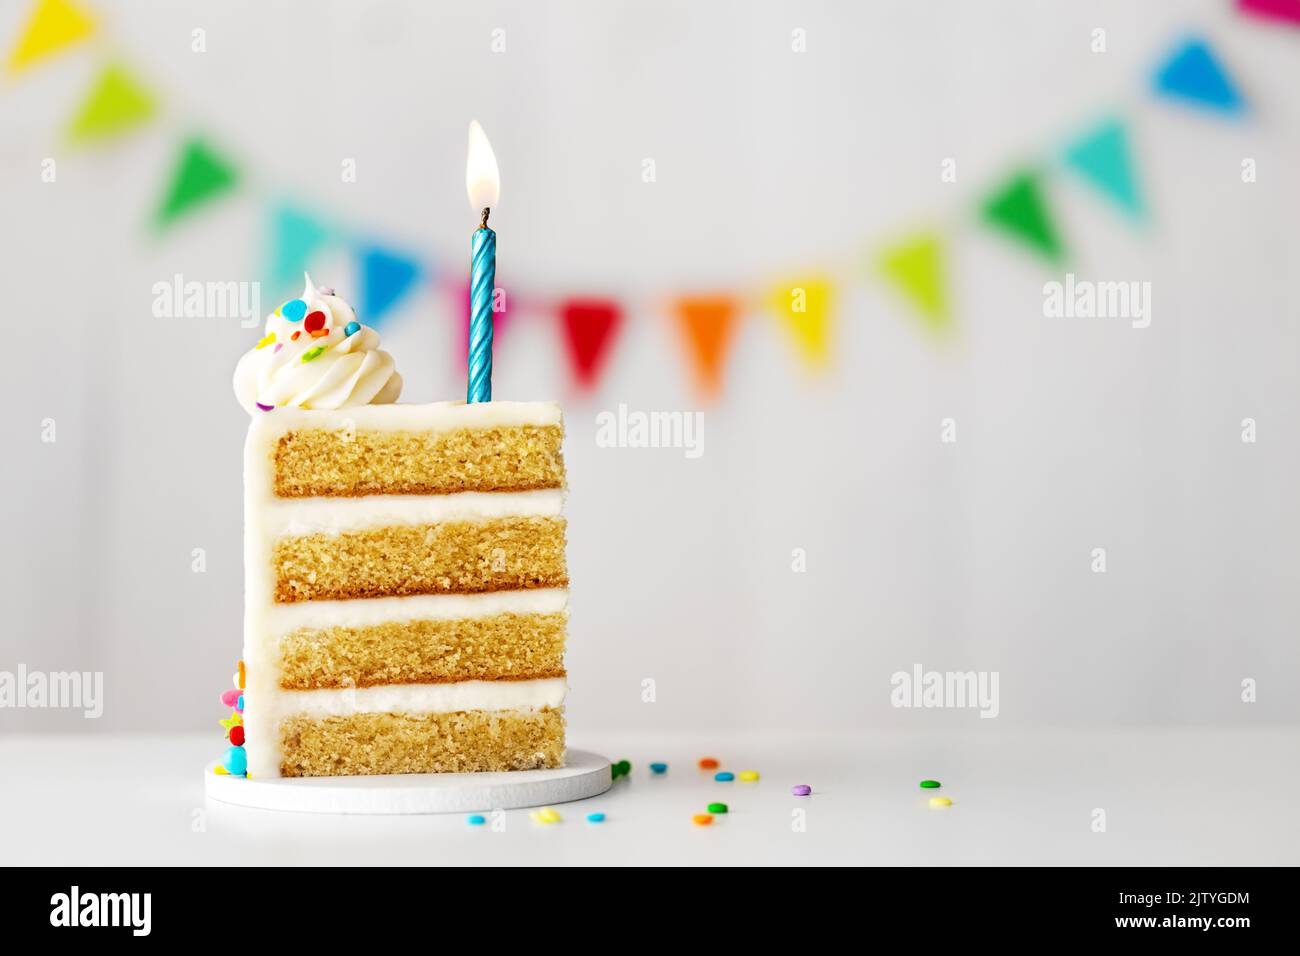 Slice of birthday cake with blue birthday candle, colorful sprinkles and celebration bunting ready for a birthday party Stock Photo